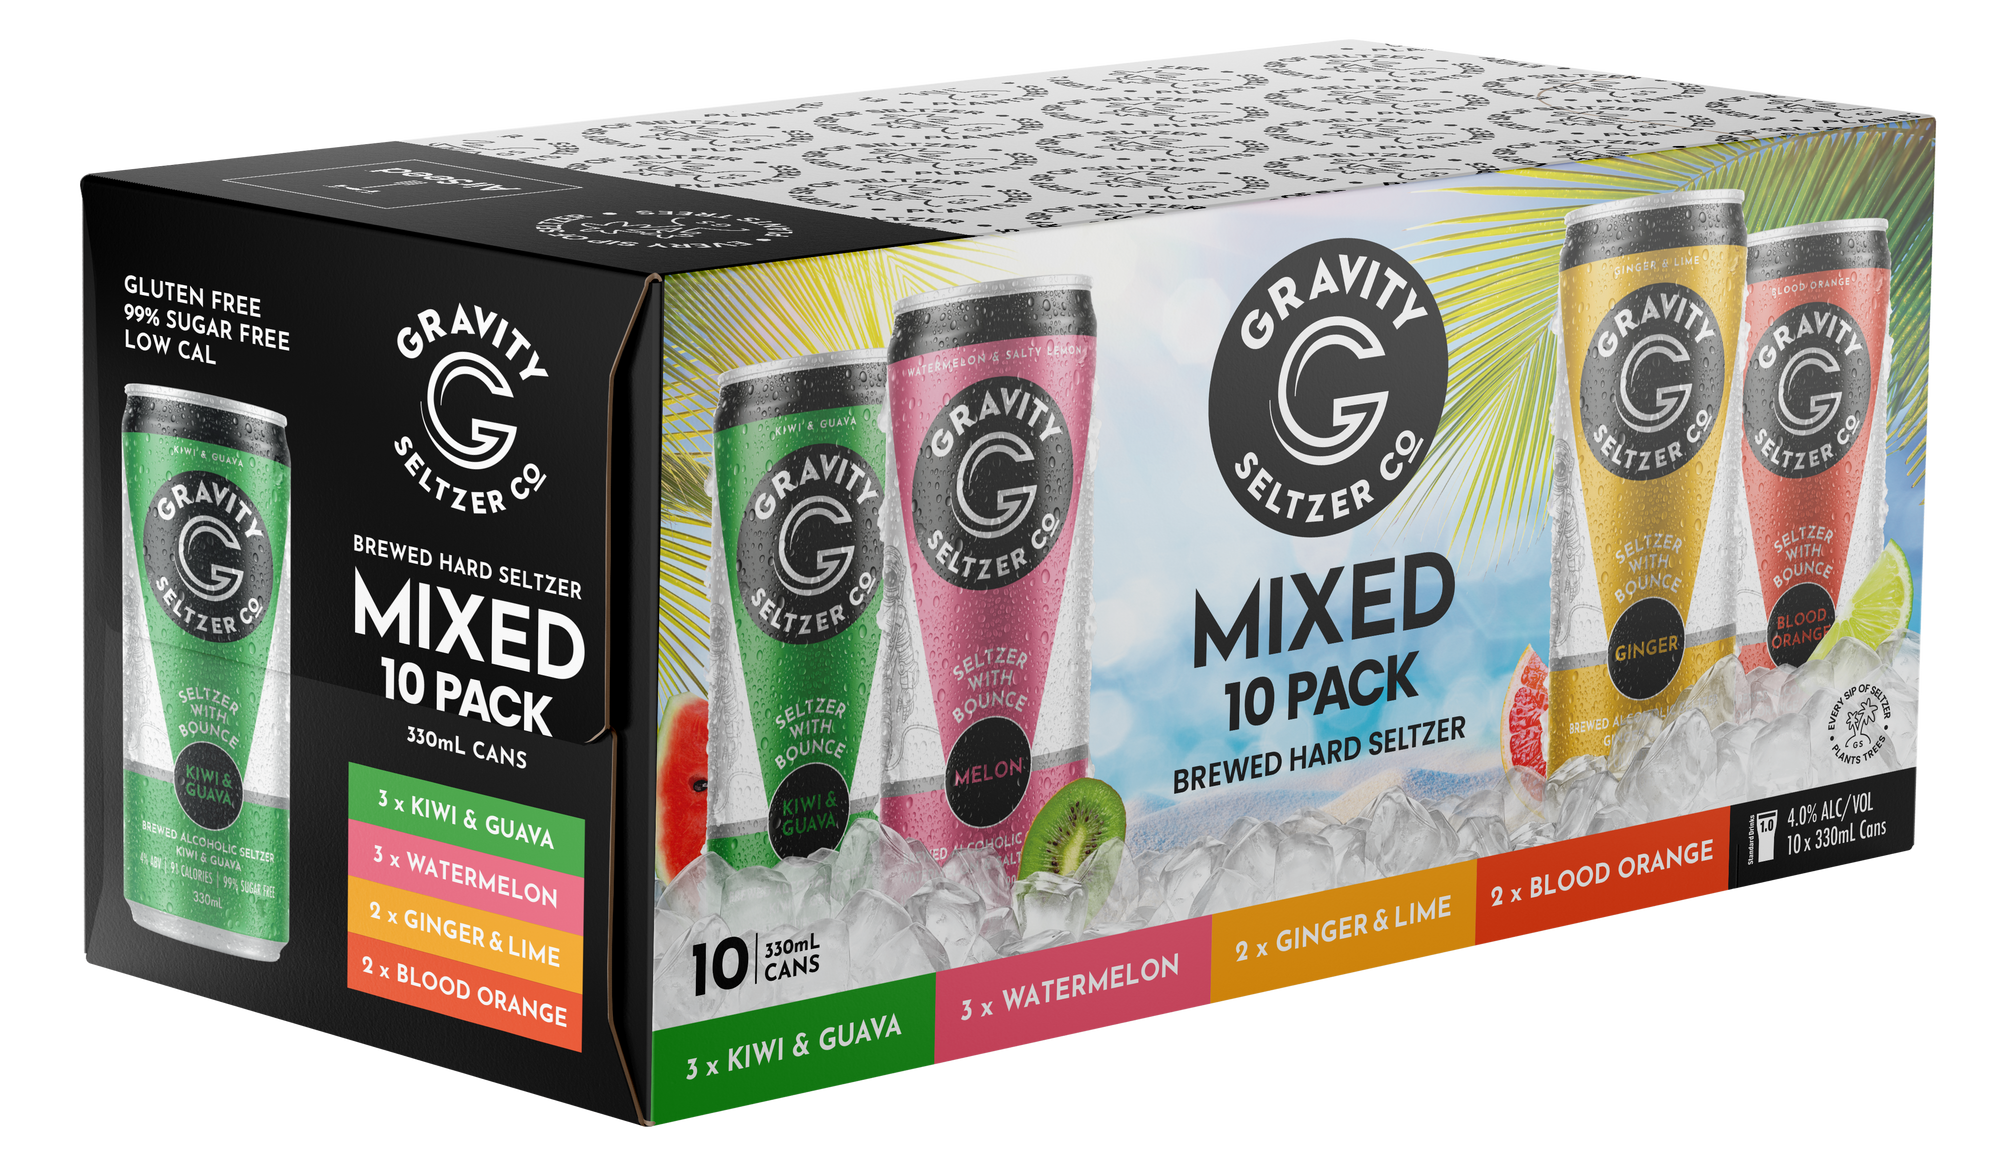 MIXED 10 PACK